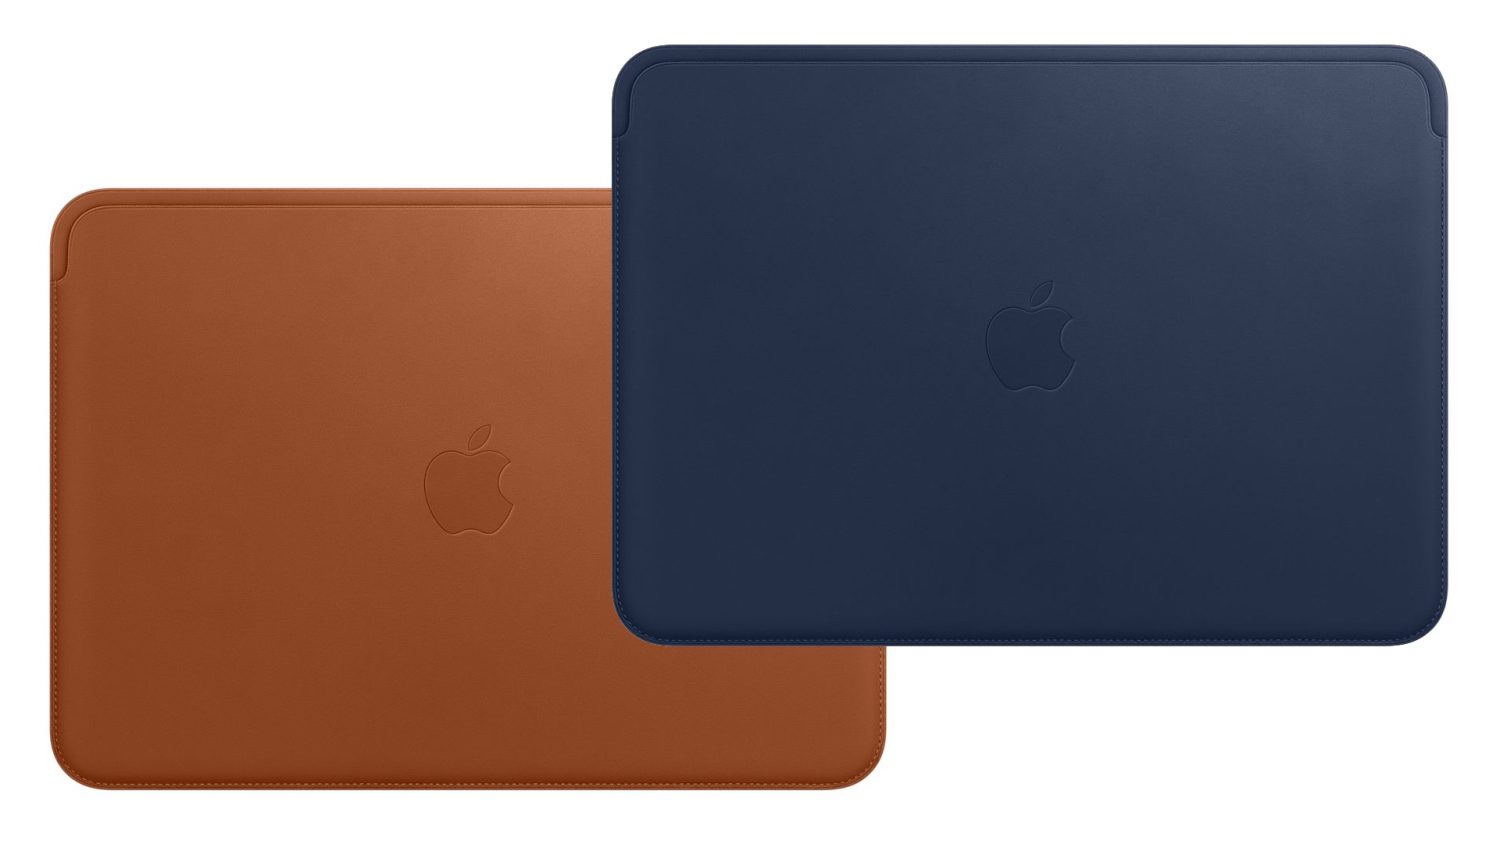 Apple quietly launches new 12-inch MacBook leather sleeve accessory